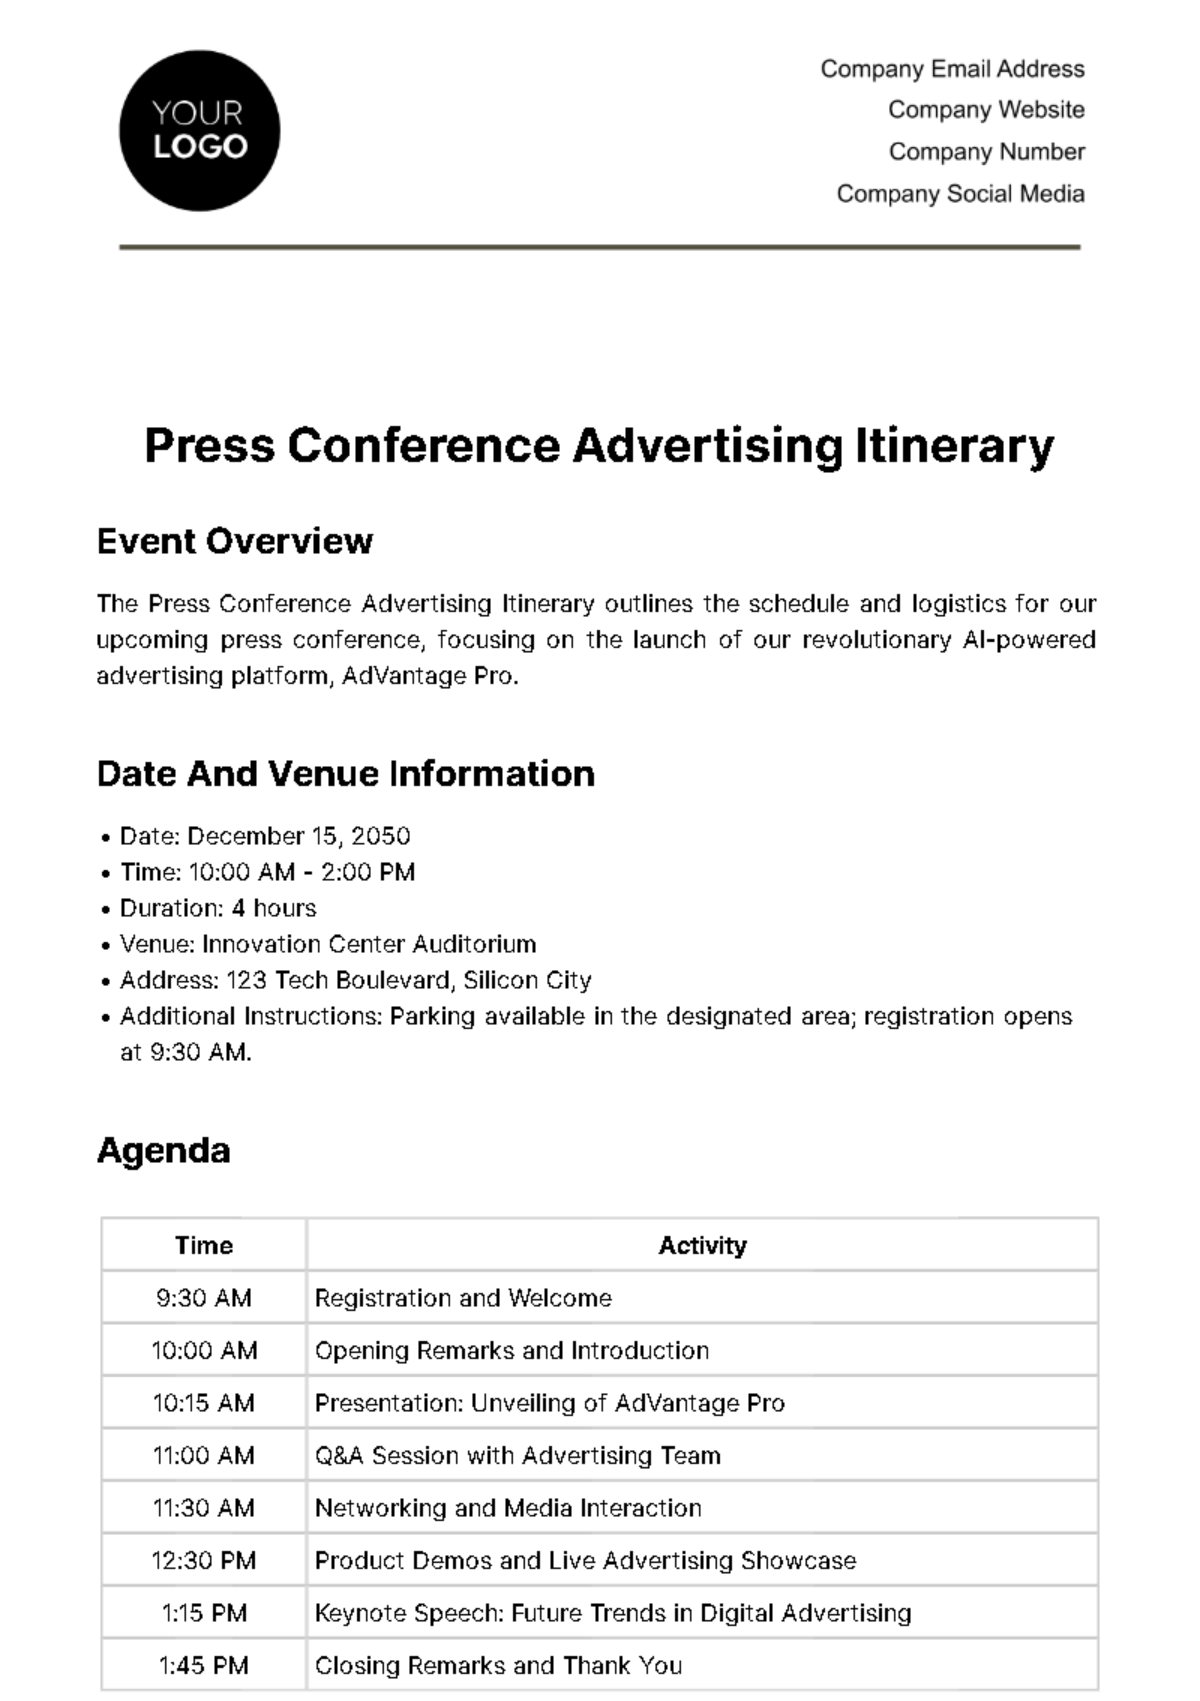 Press Conference Advertising Itinerary Template